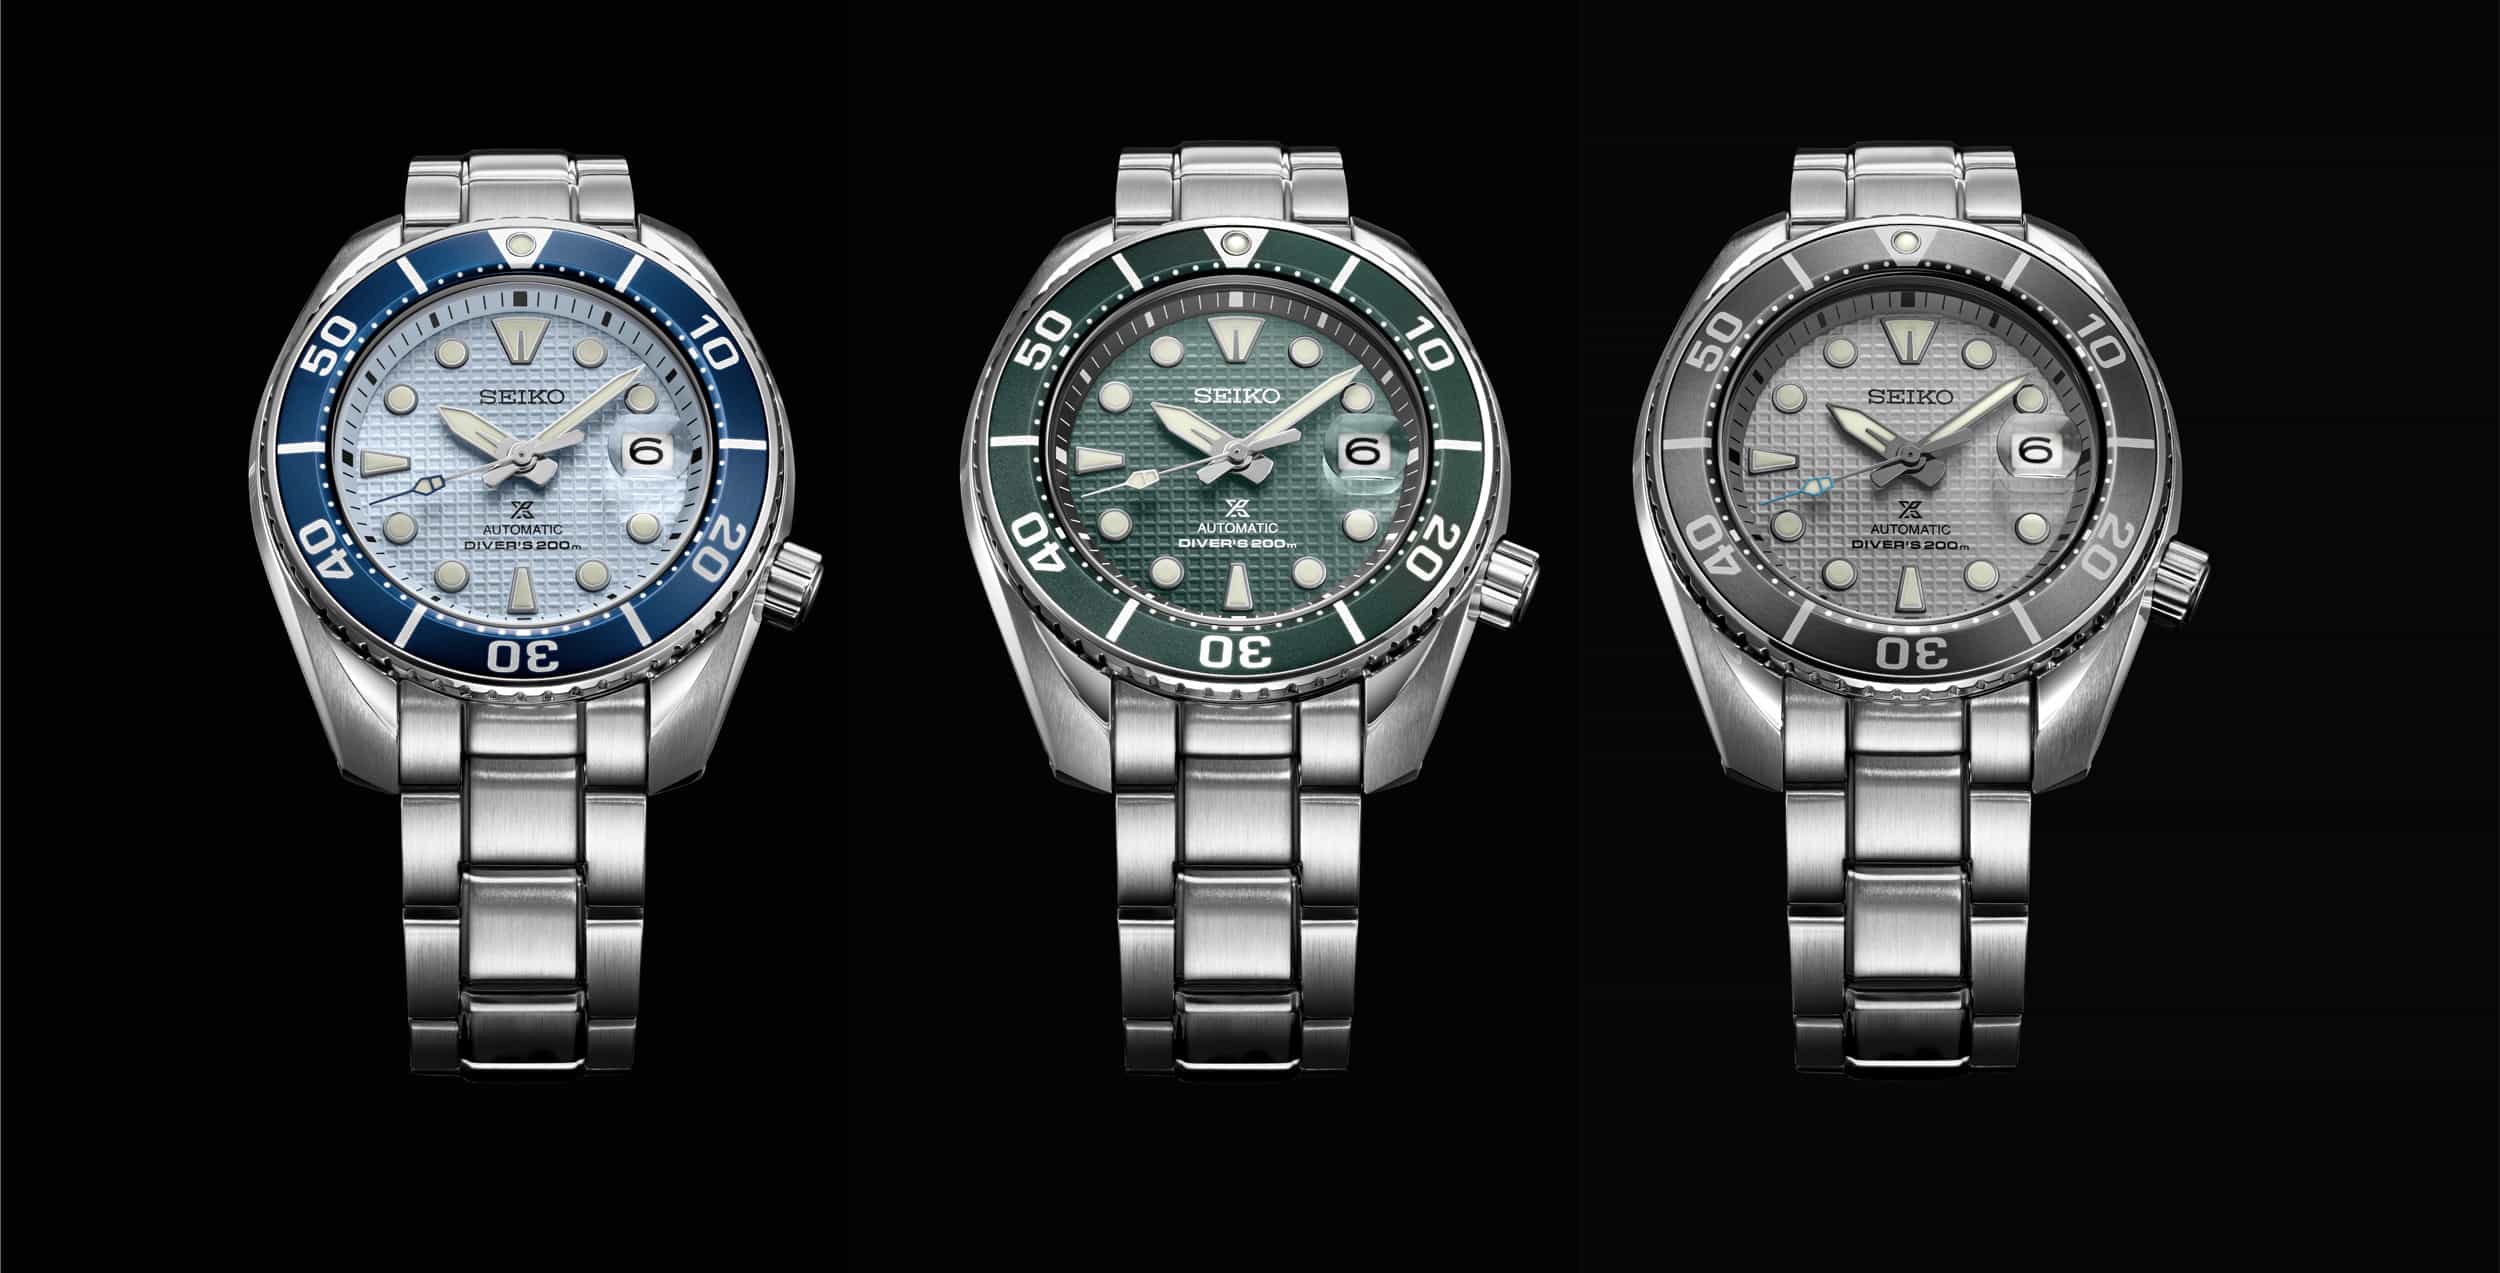 Seiko's new Built For The Ice Diver